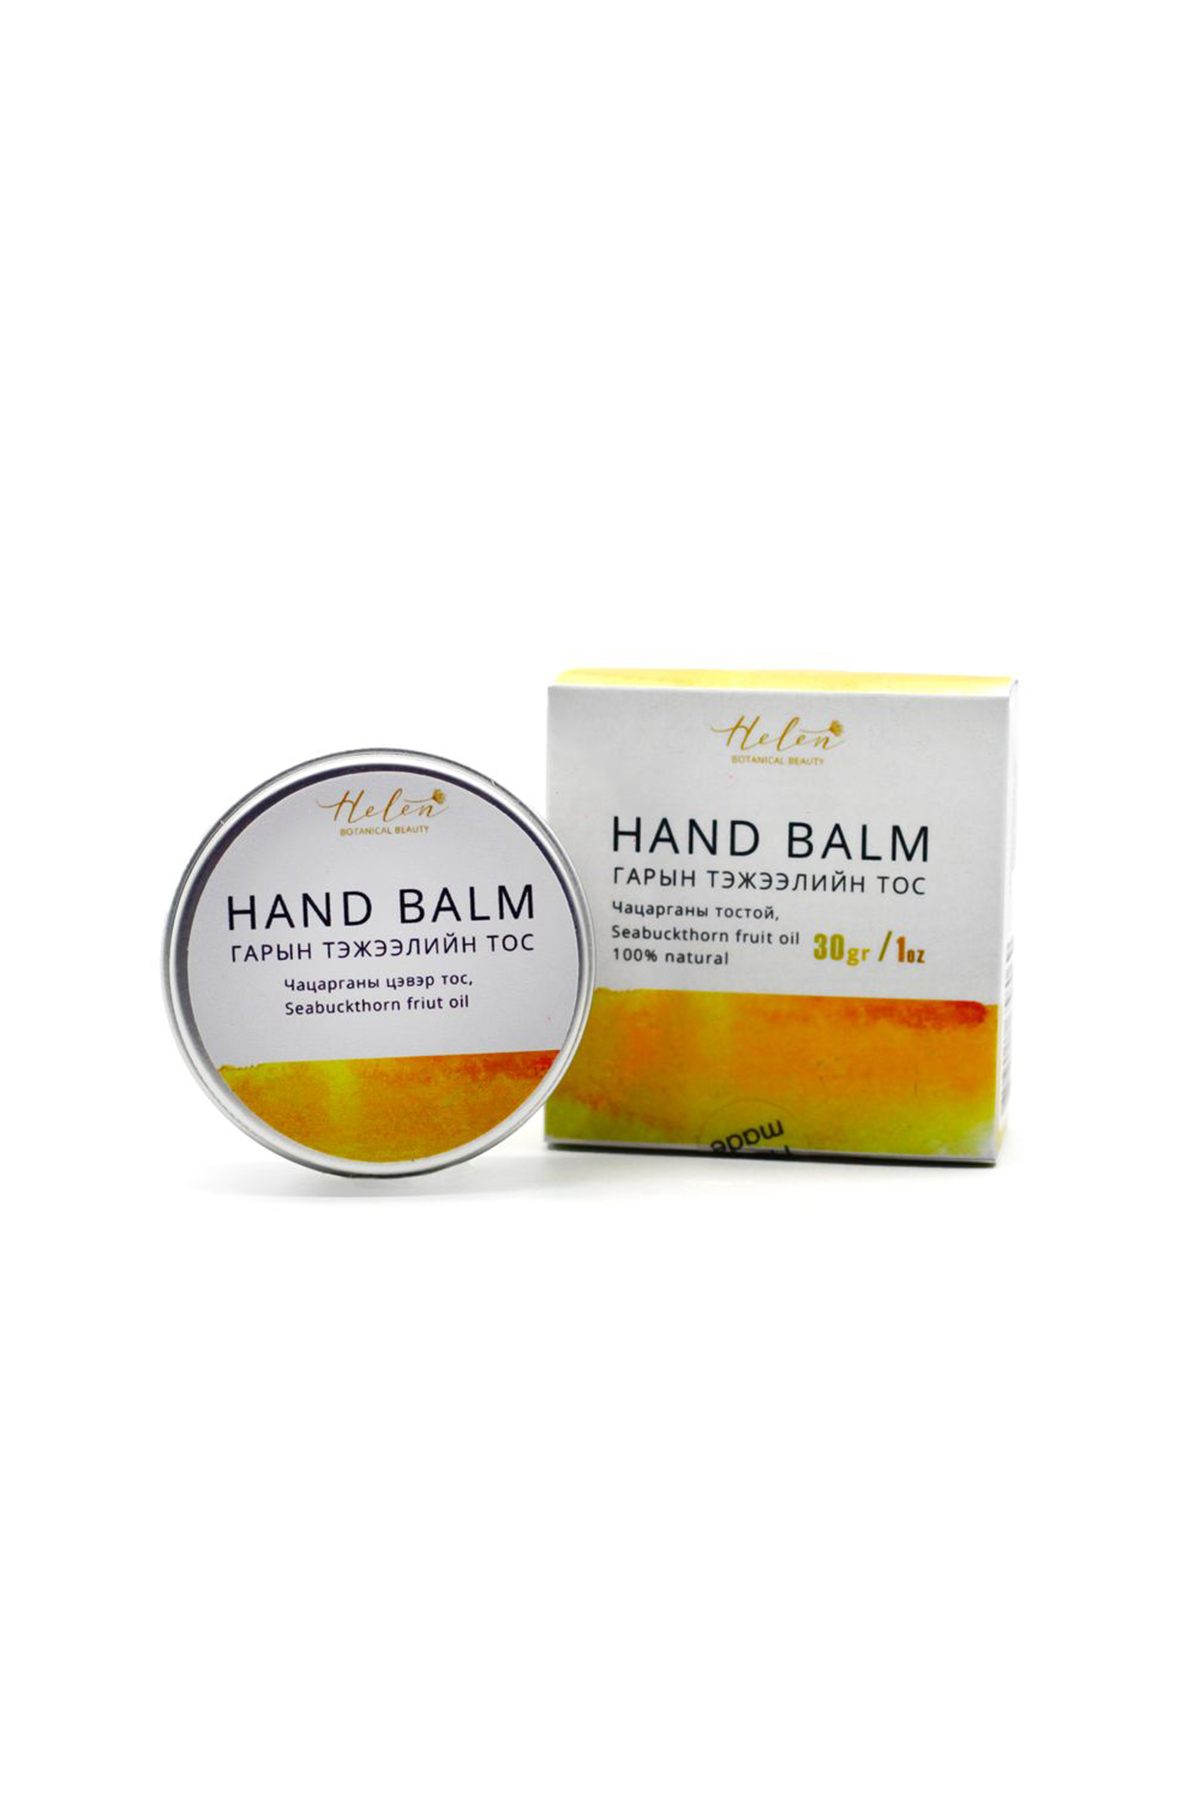 Hand and body balm made with seabuckthorn oil. Rich in Vitamin D for deep hydration 